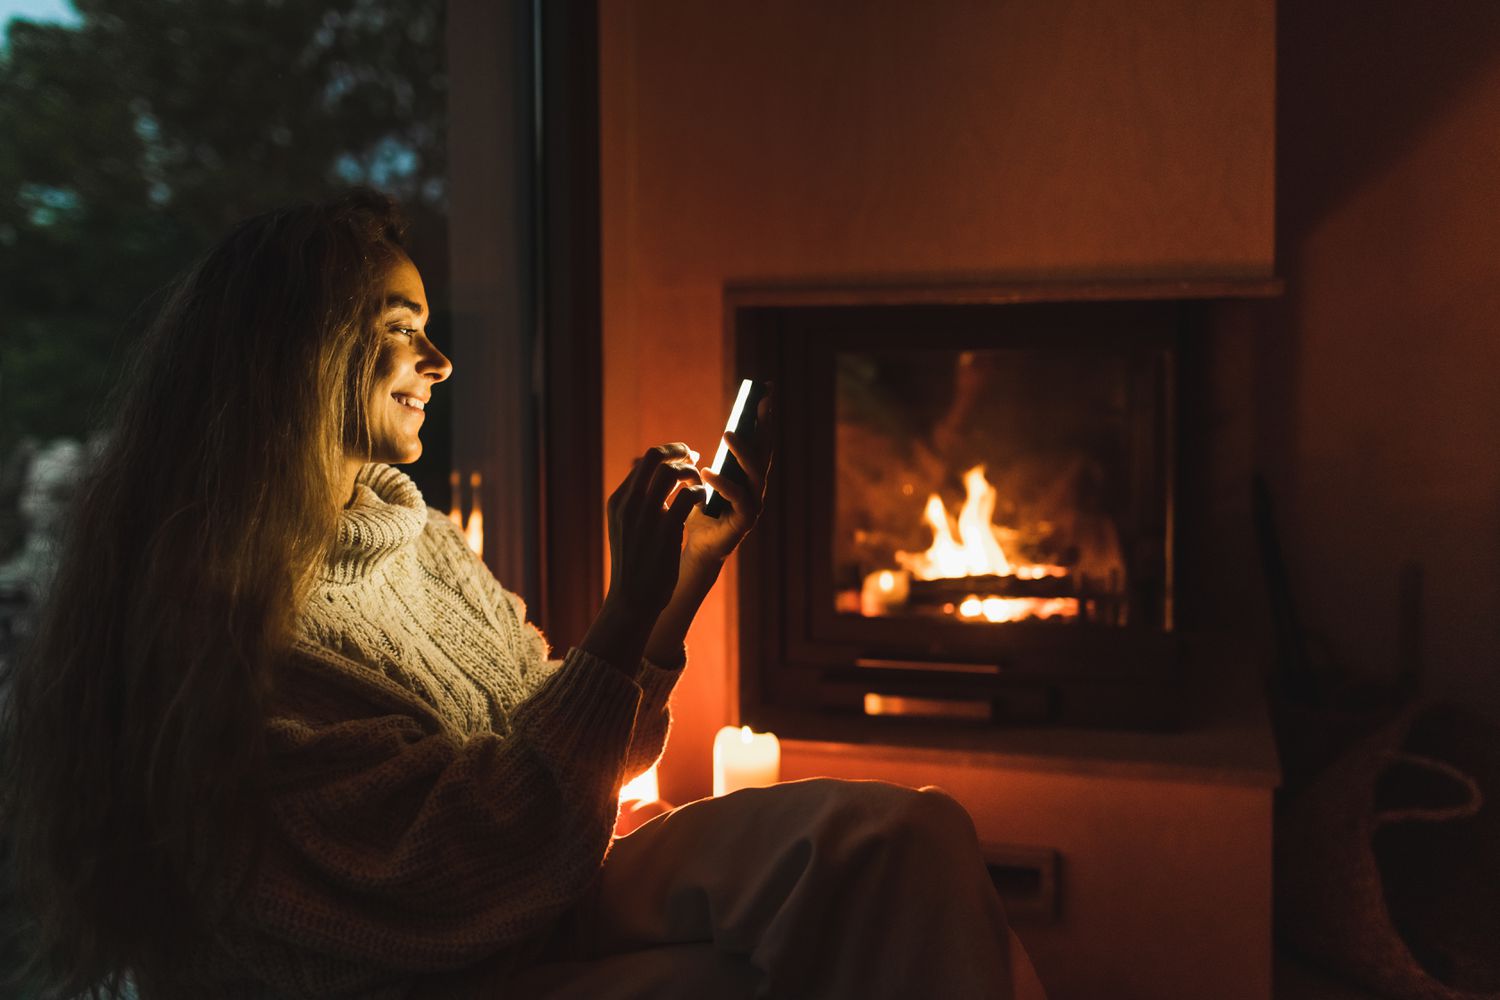 Smiling woman sitting with mobile phone on windowsill near fireplace at night